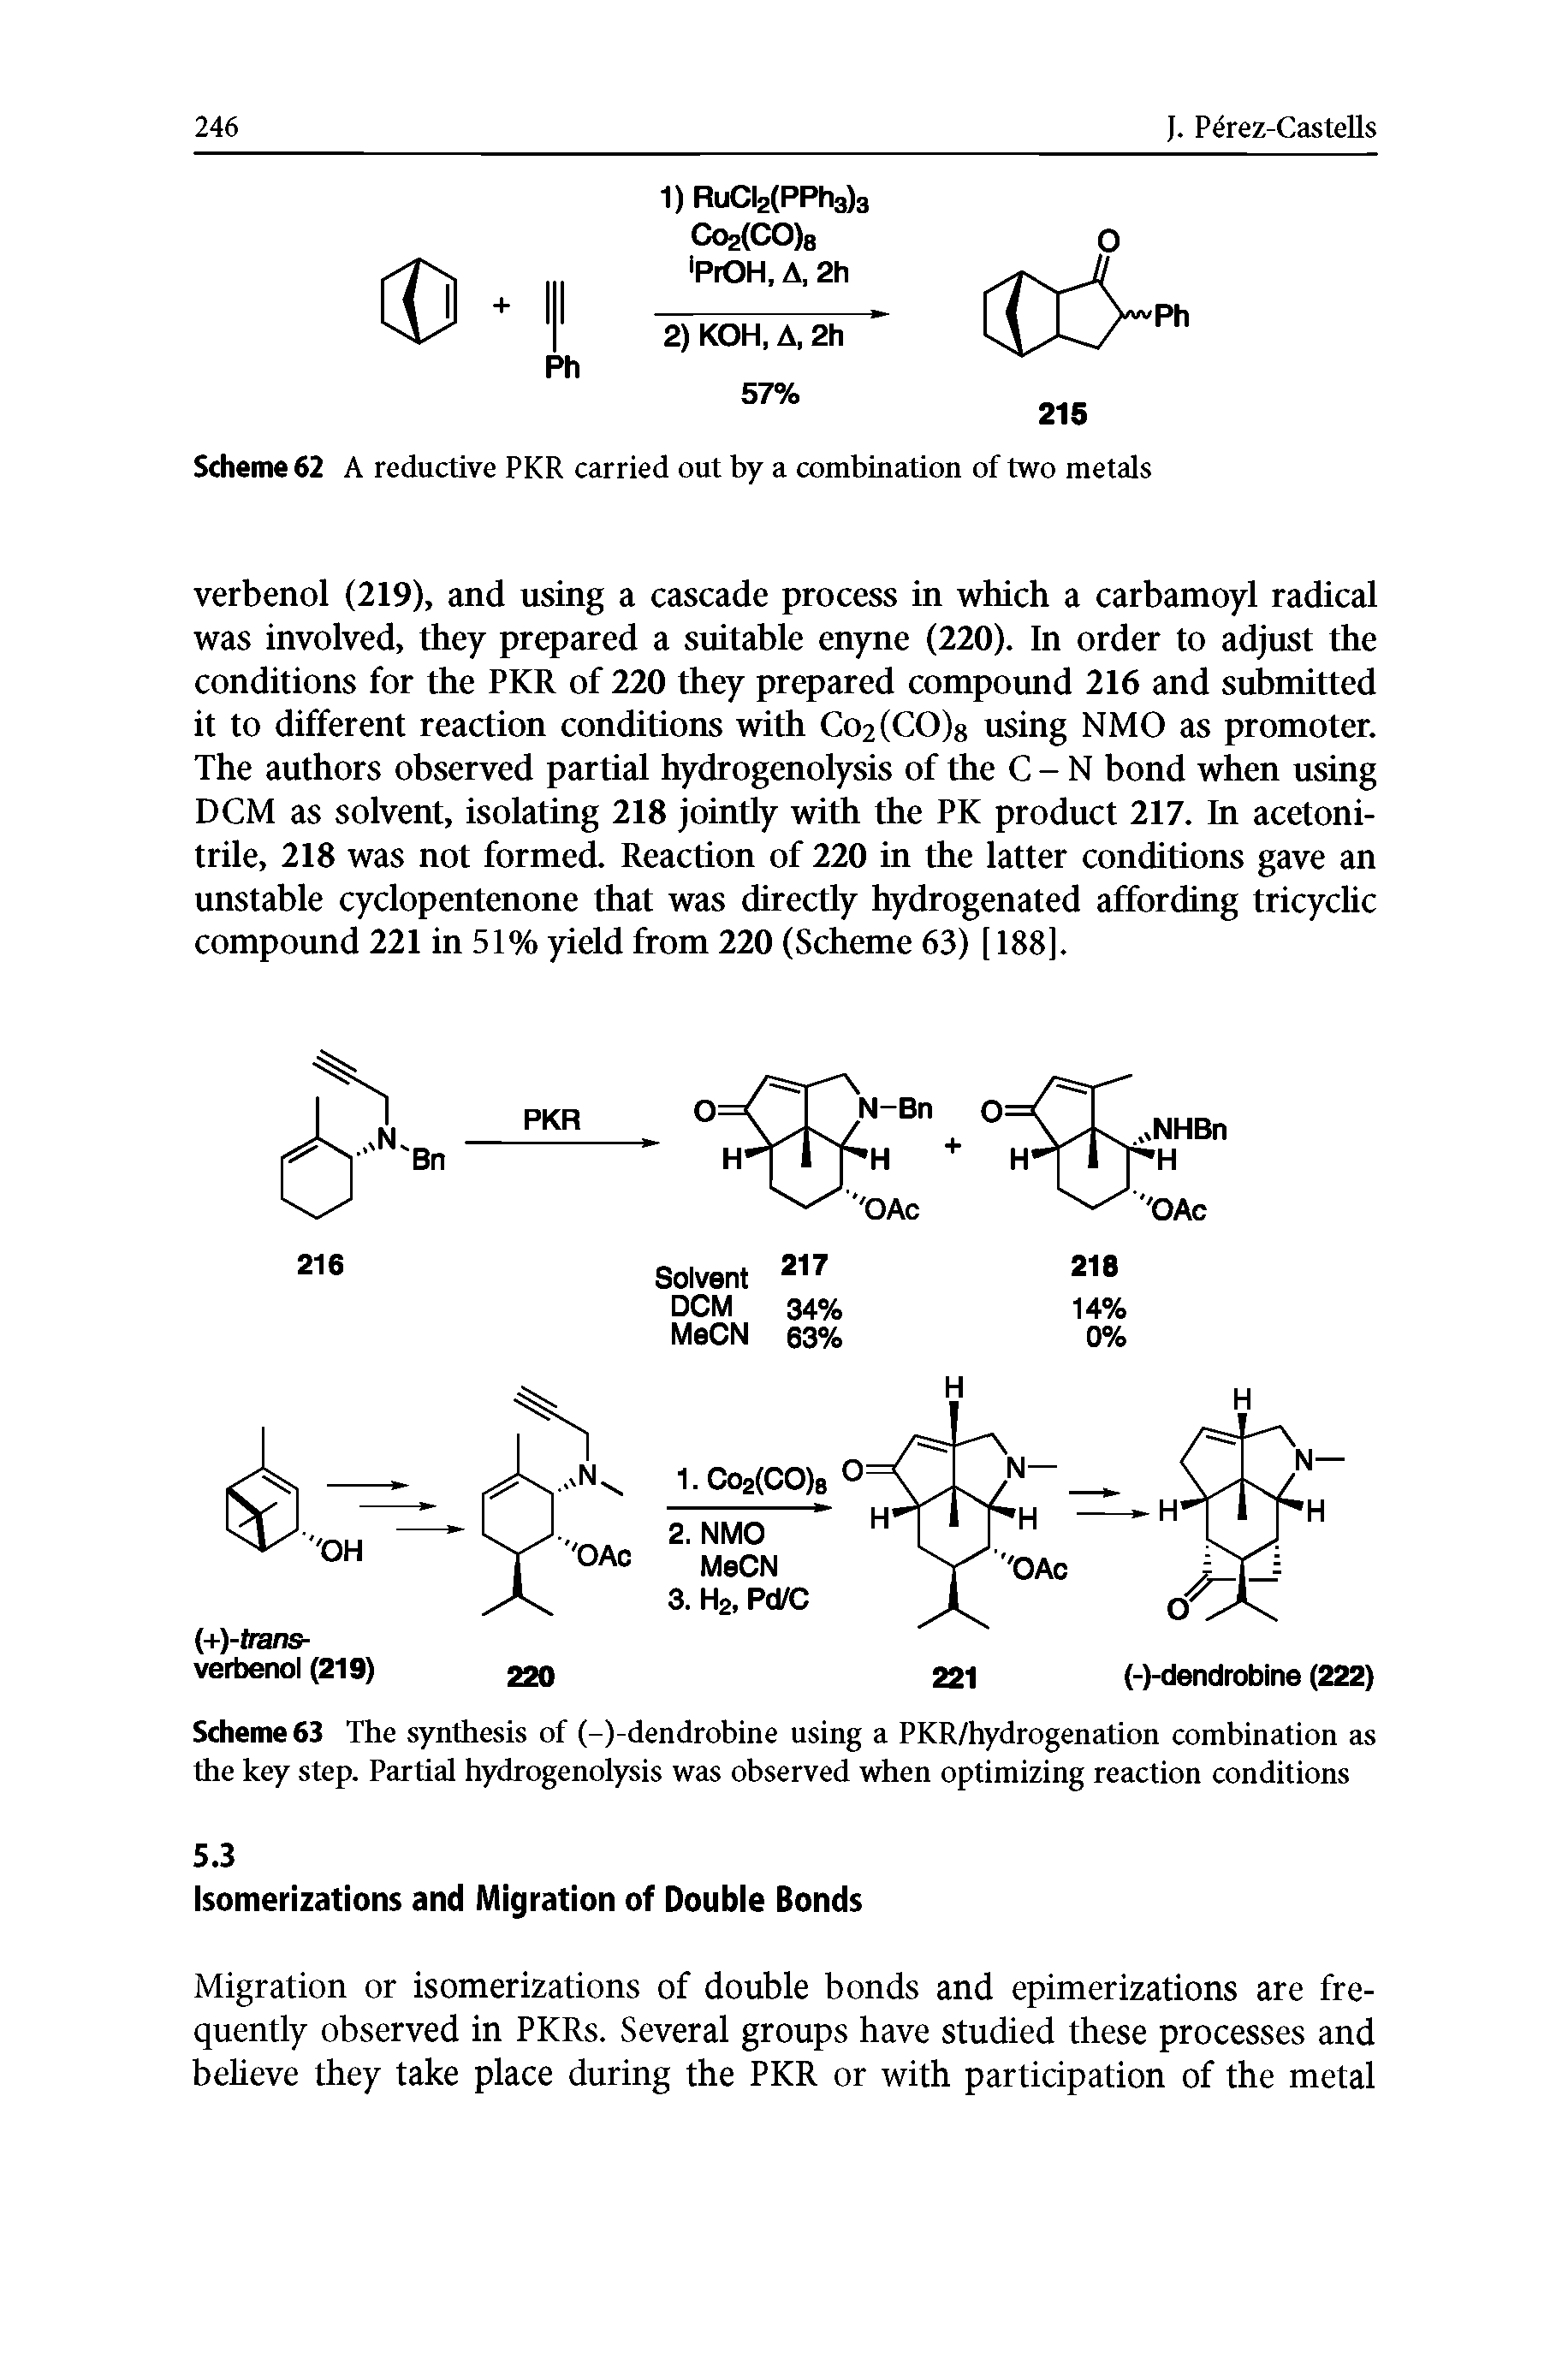 Scheme 63 The synthesis of (-)-dendrobine using a PKR/hydrogenation combination as the key step. Partial hydrogenolysis was observed when optimizing reaction conditions...